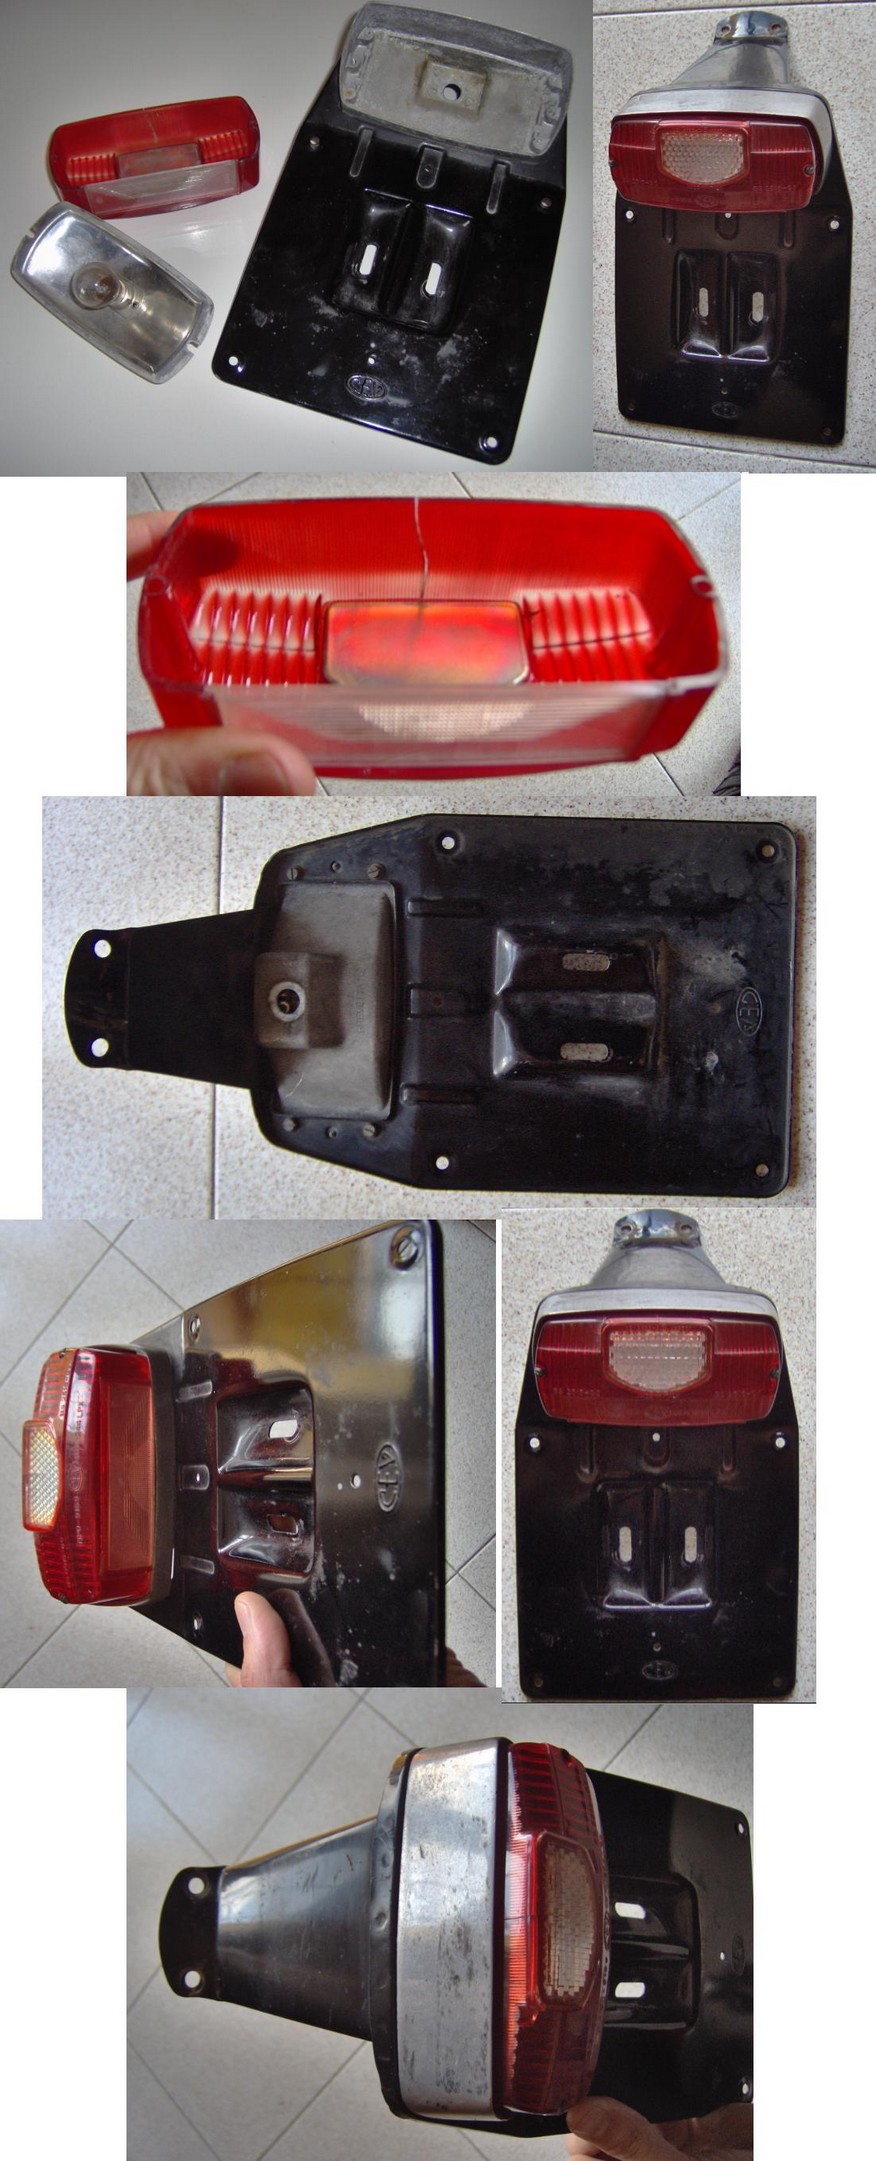 Additional photos of the CEV 5840 tail light (note black bracket is different).